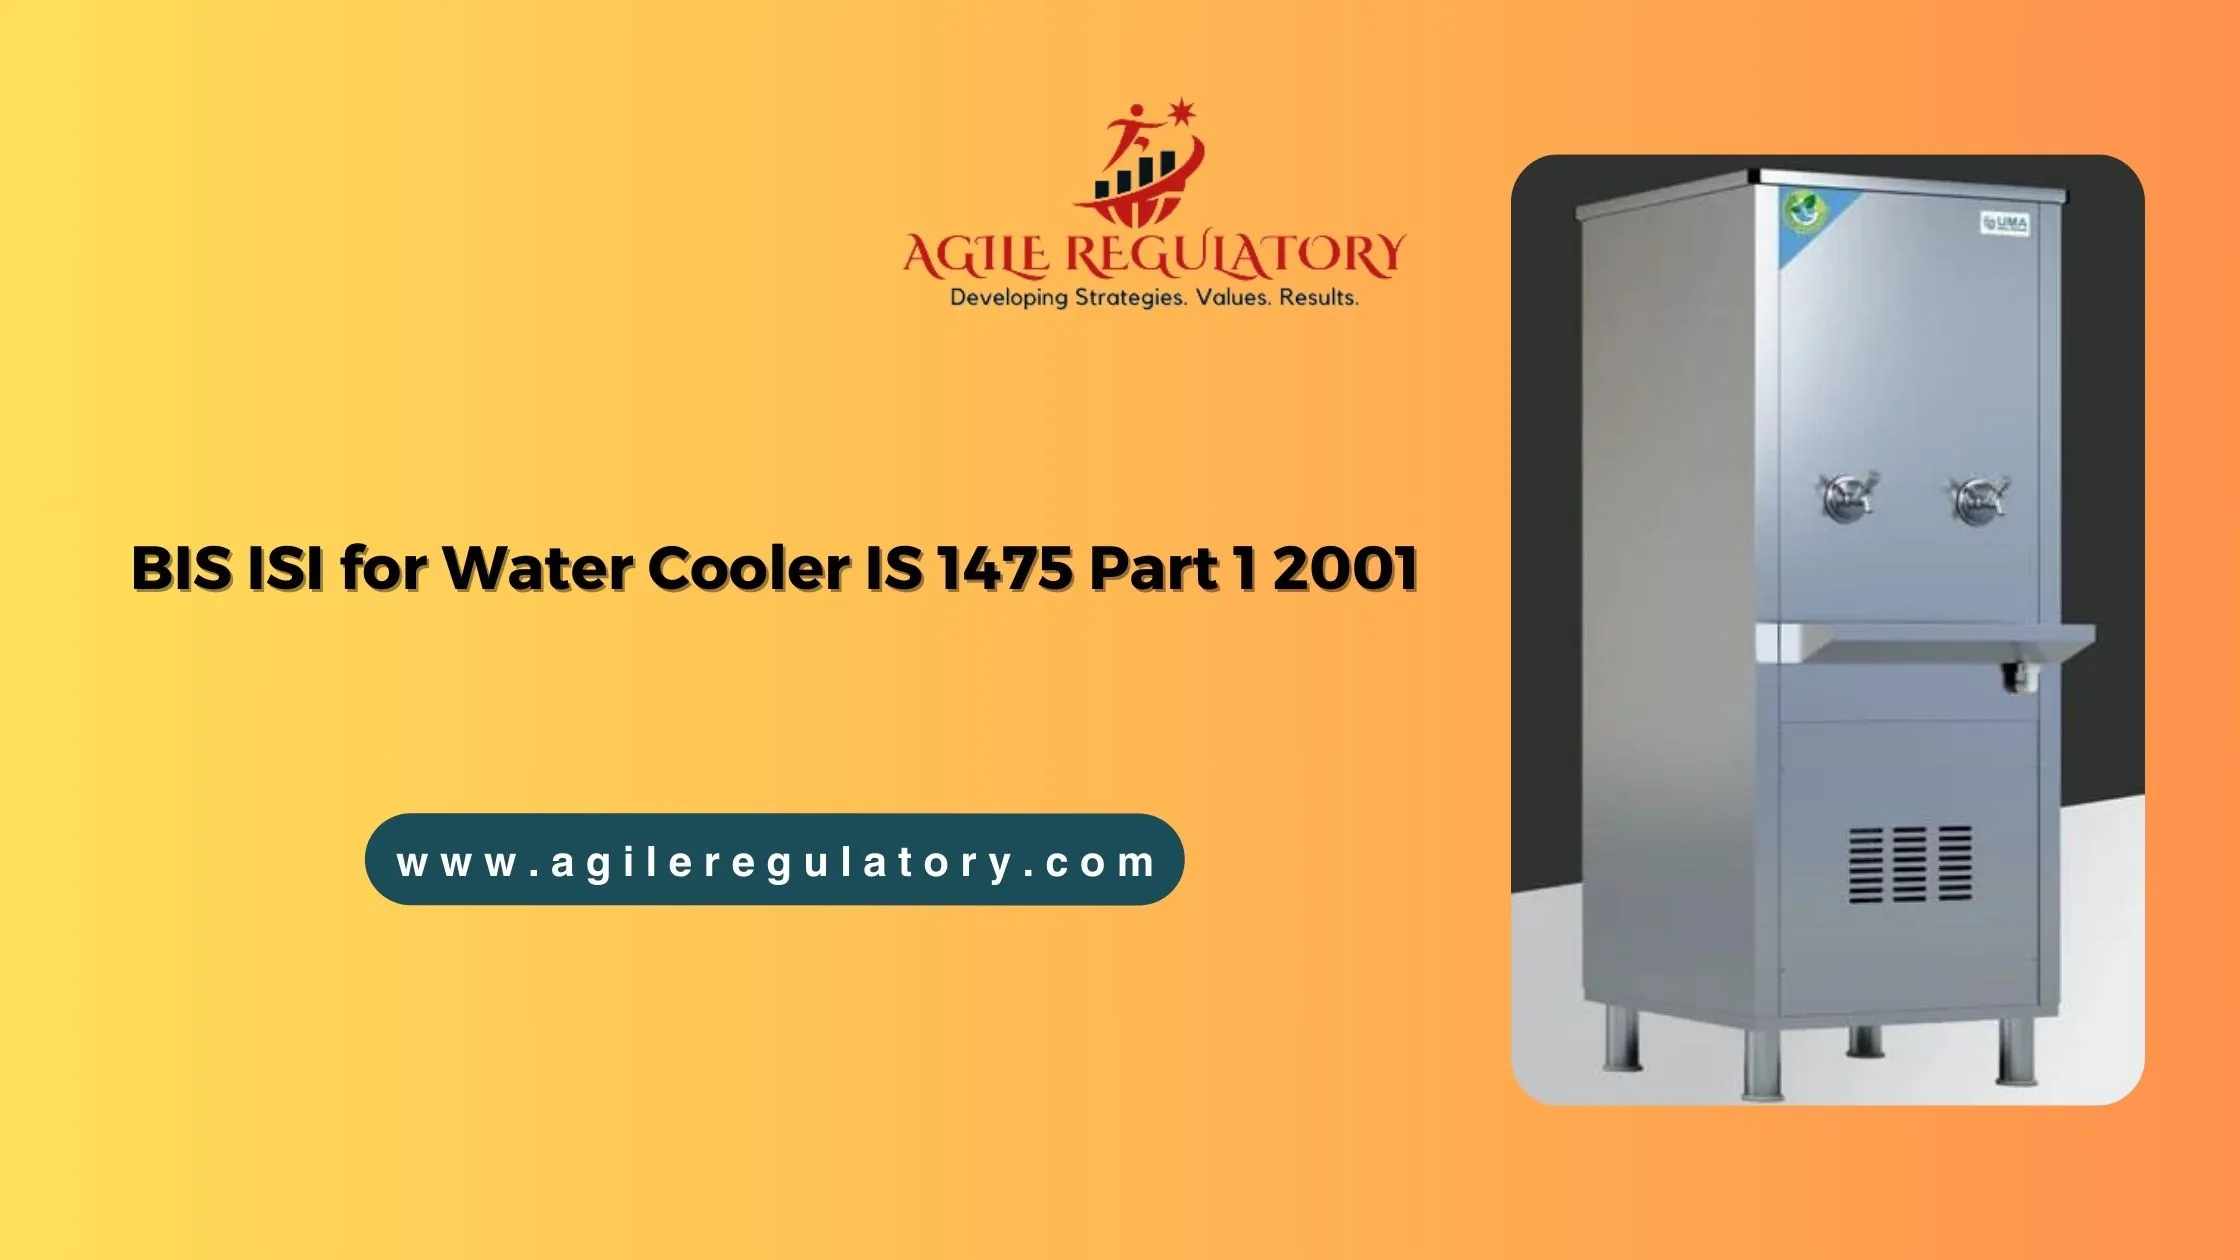 BIS ISI for Water Cooler IS 1475 Part 1 2001